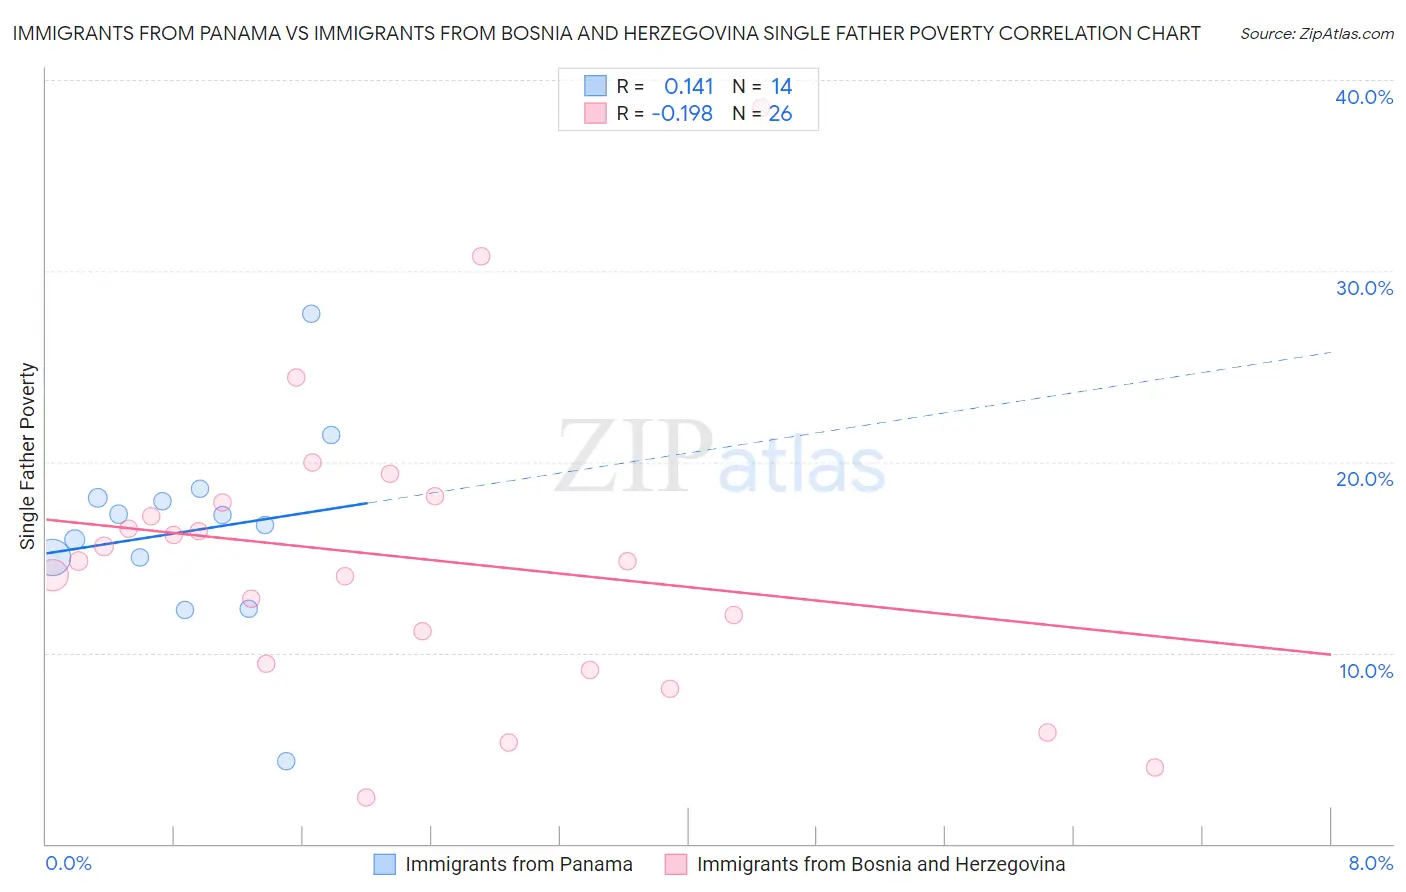 Immigrants from Panama vs Immigrants from Bosnia and Herzegovina Single Father Poverty